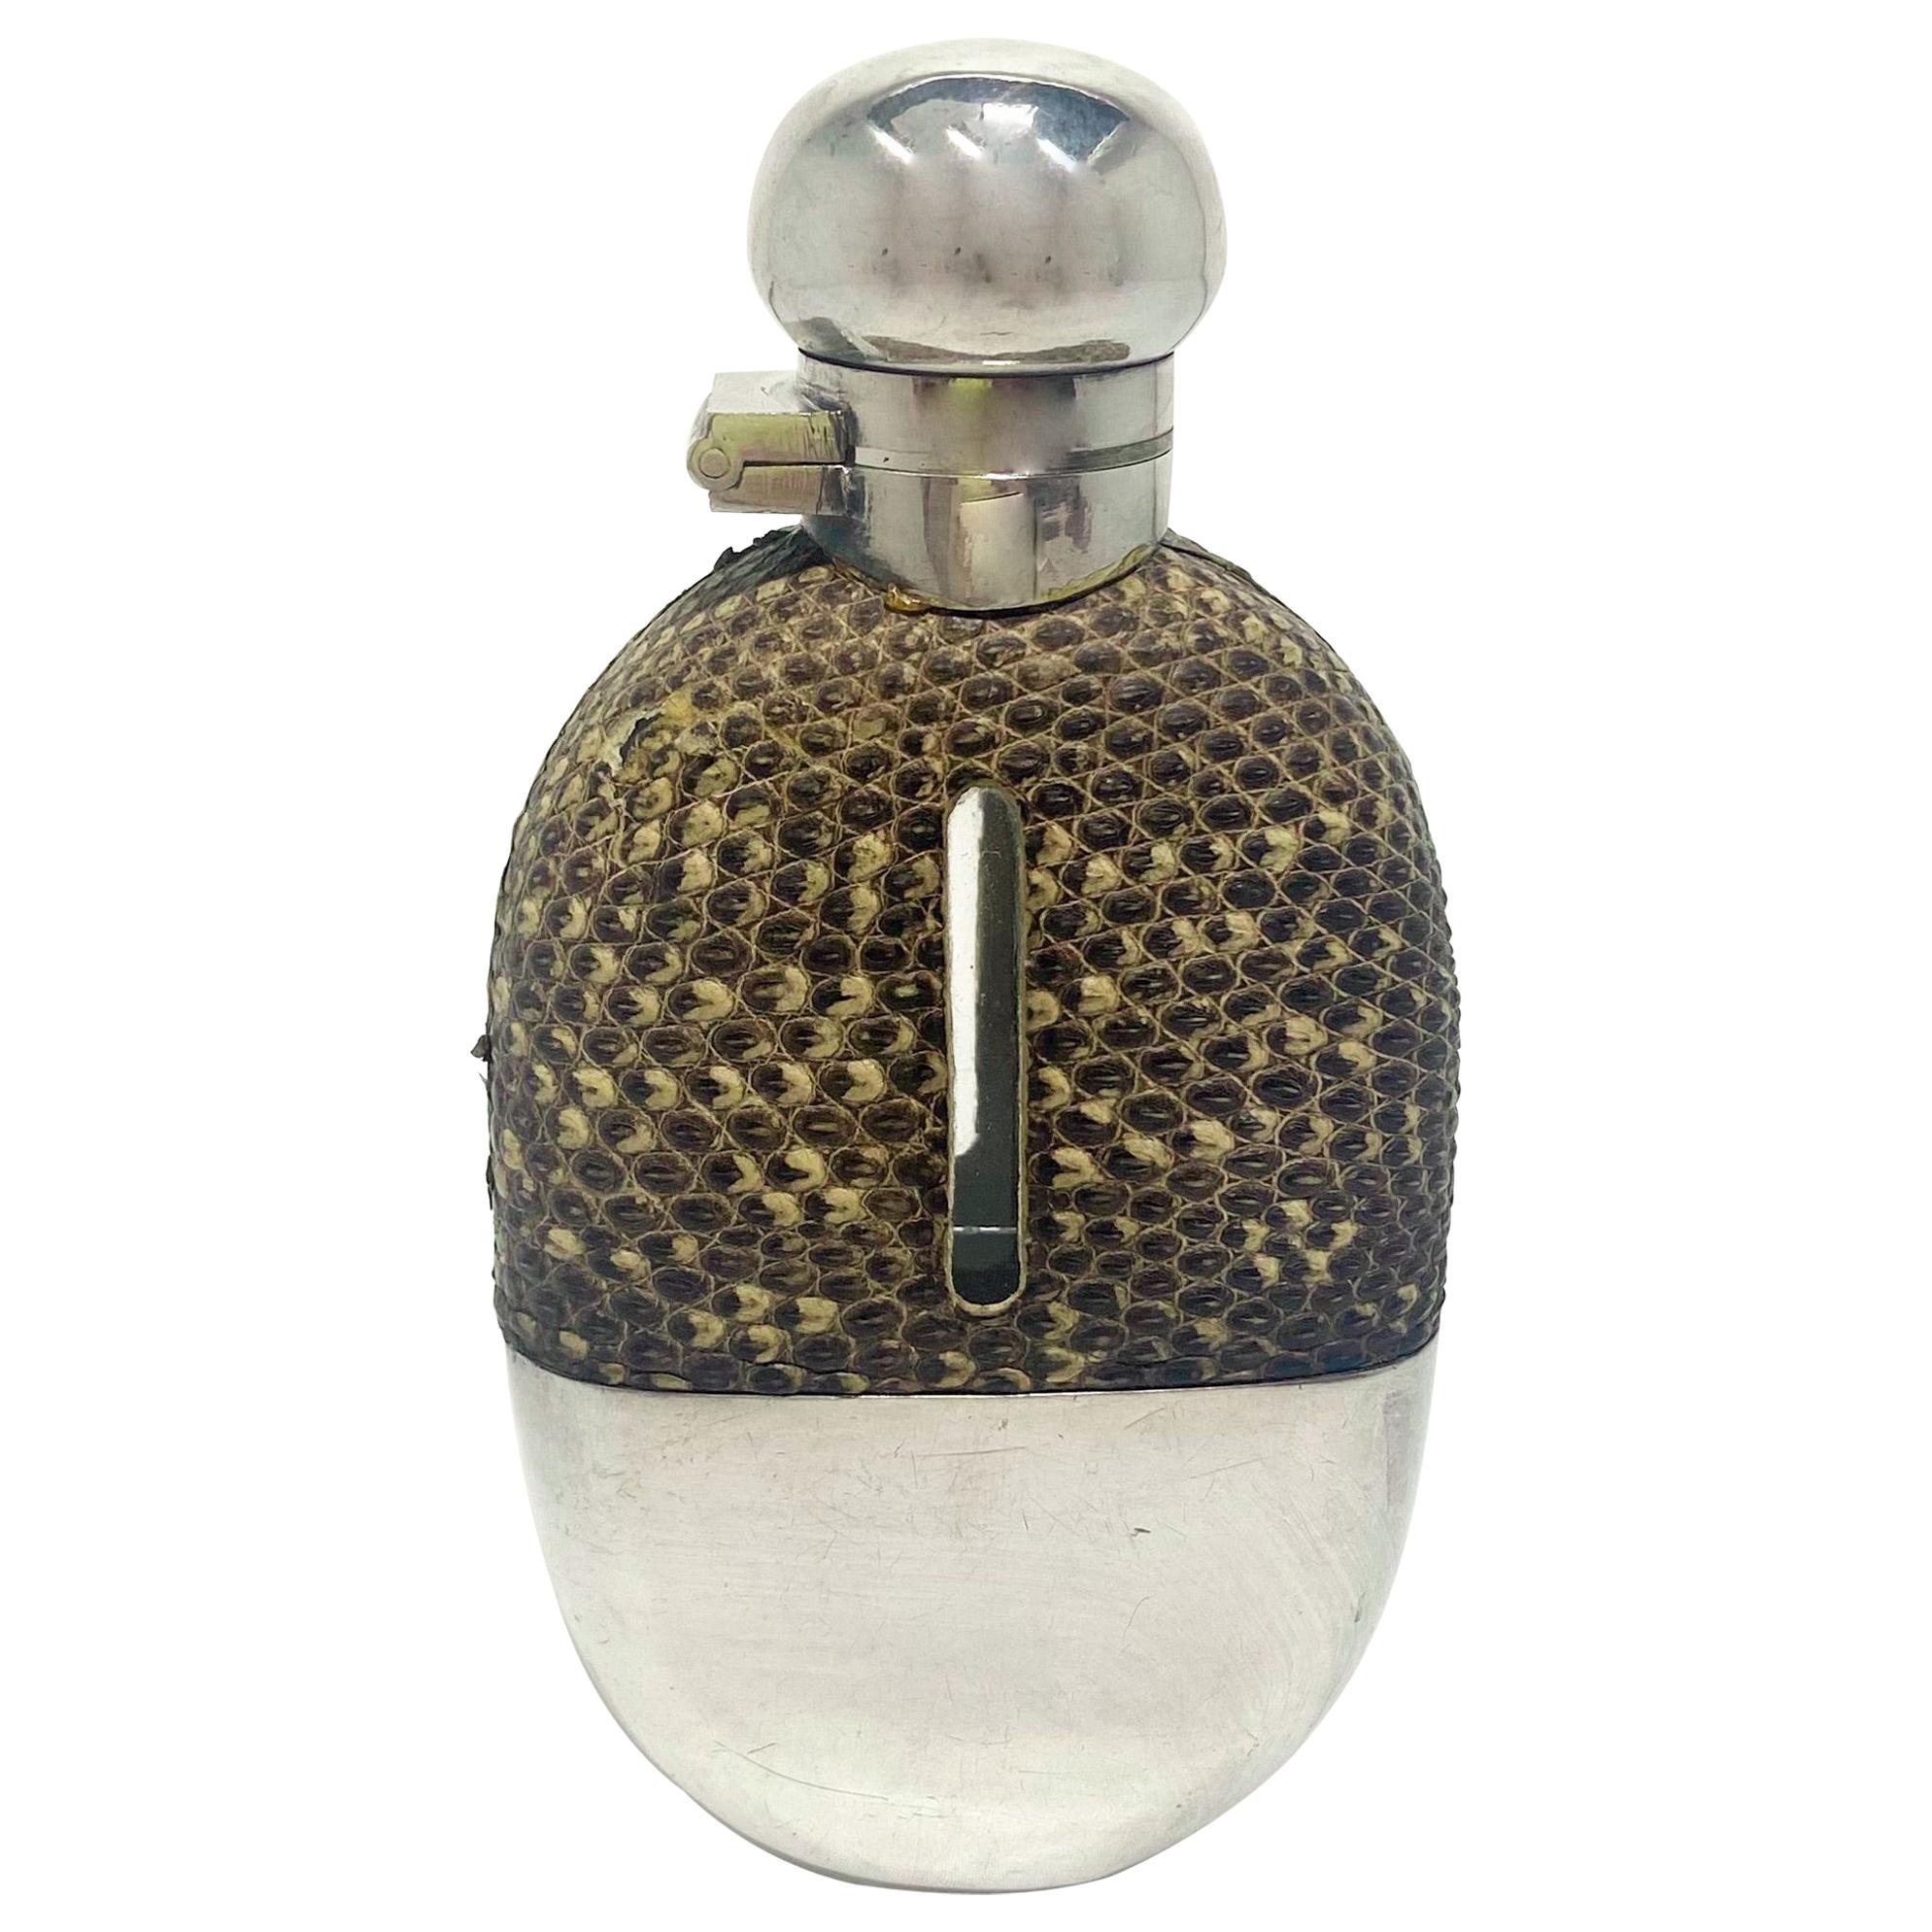 Antique English Silver-Plate and Snakeskin Hip Flask, Circa 1900